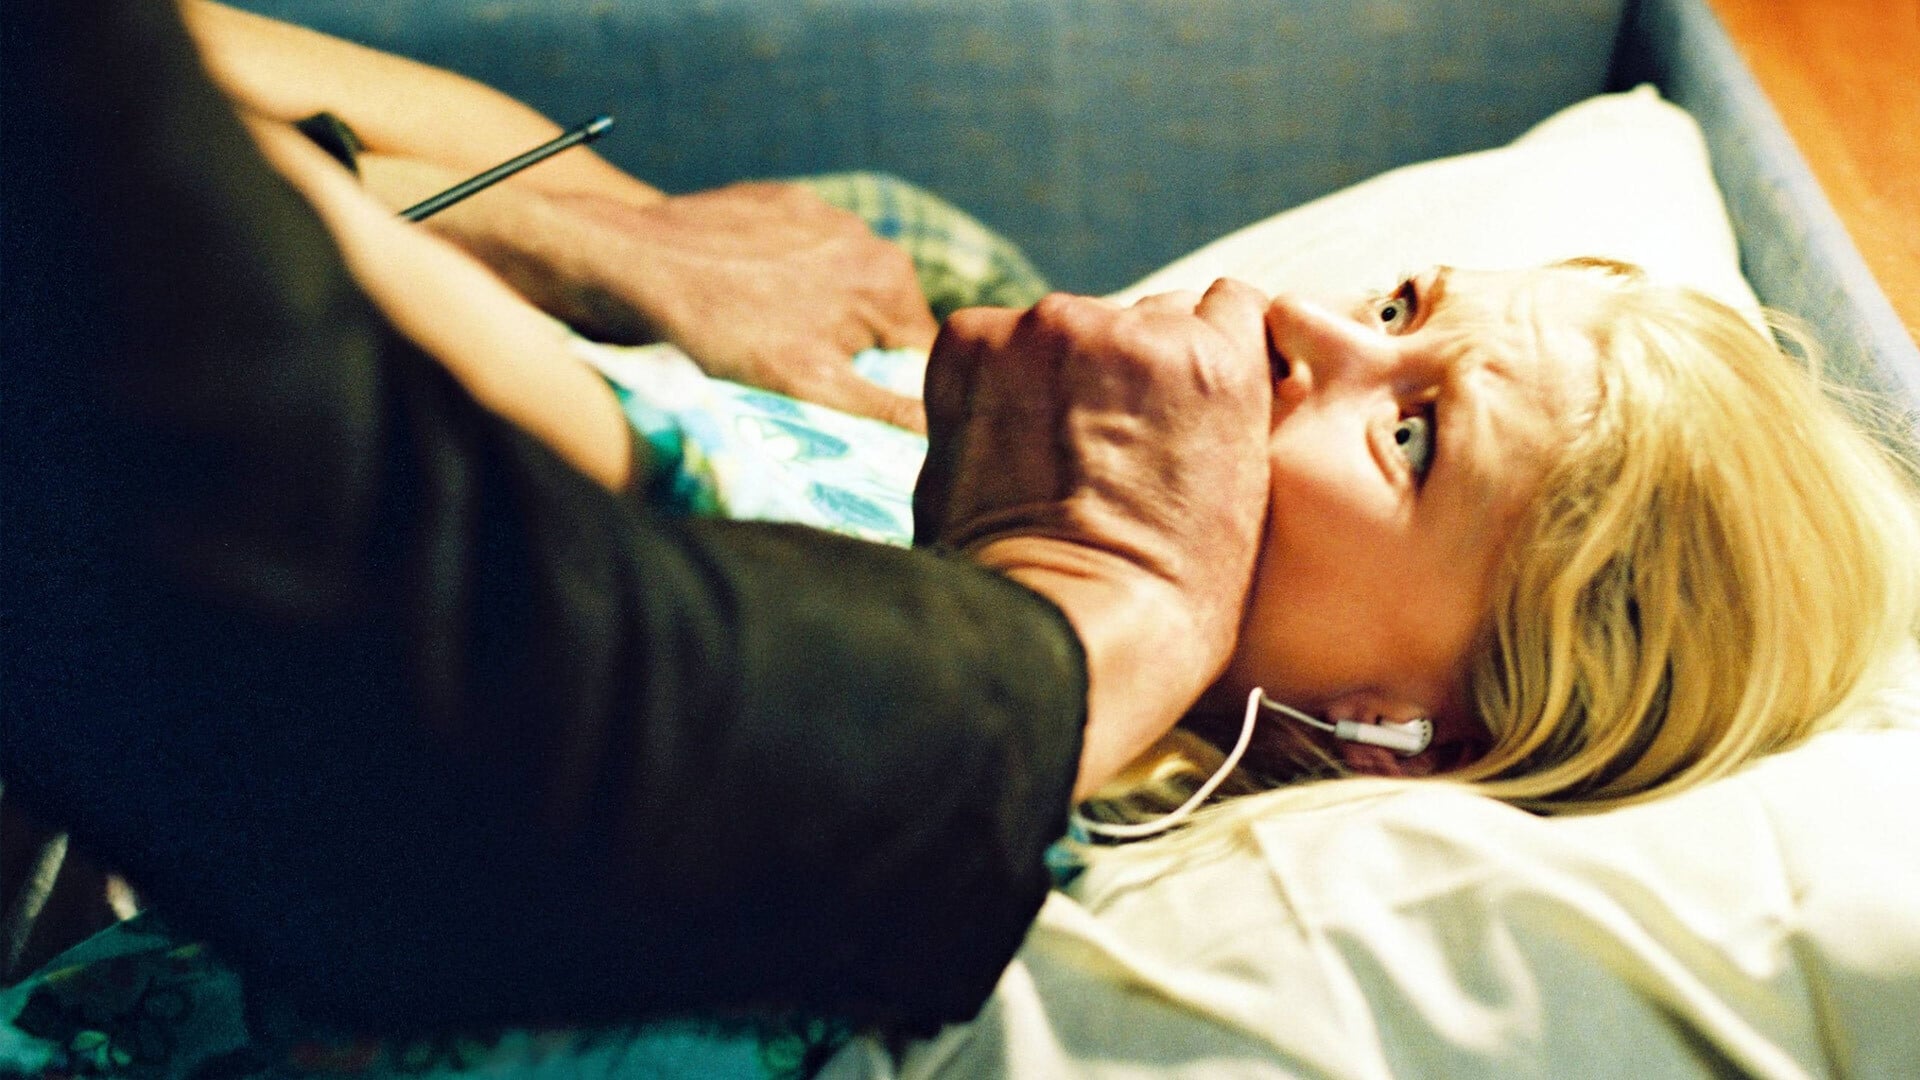 Screenshot from the 2006 film The Hills Have Eyes. A blonde woman is laying in bed with a man covering her mouth. The expression on the woman's face is of terror. 